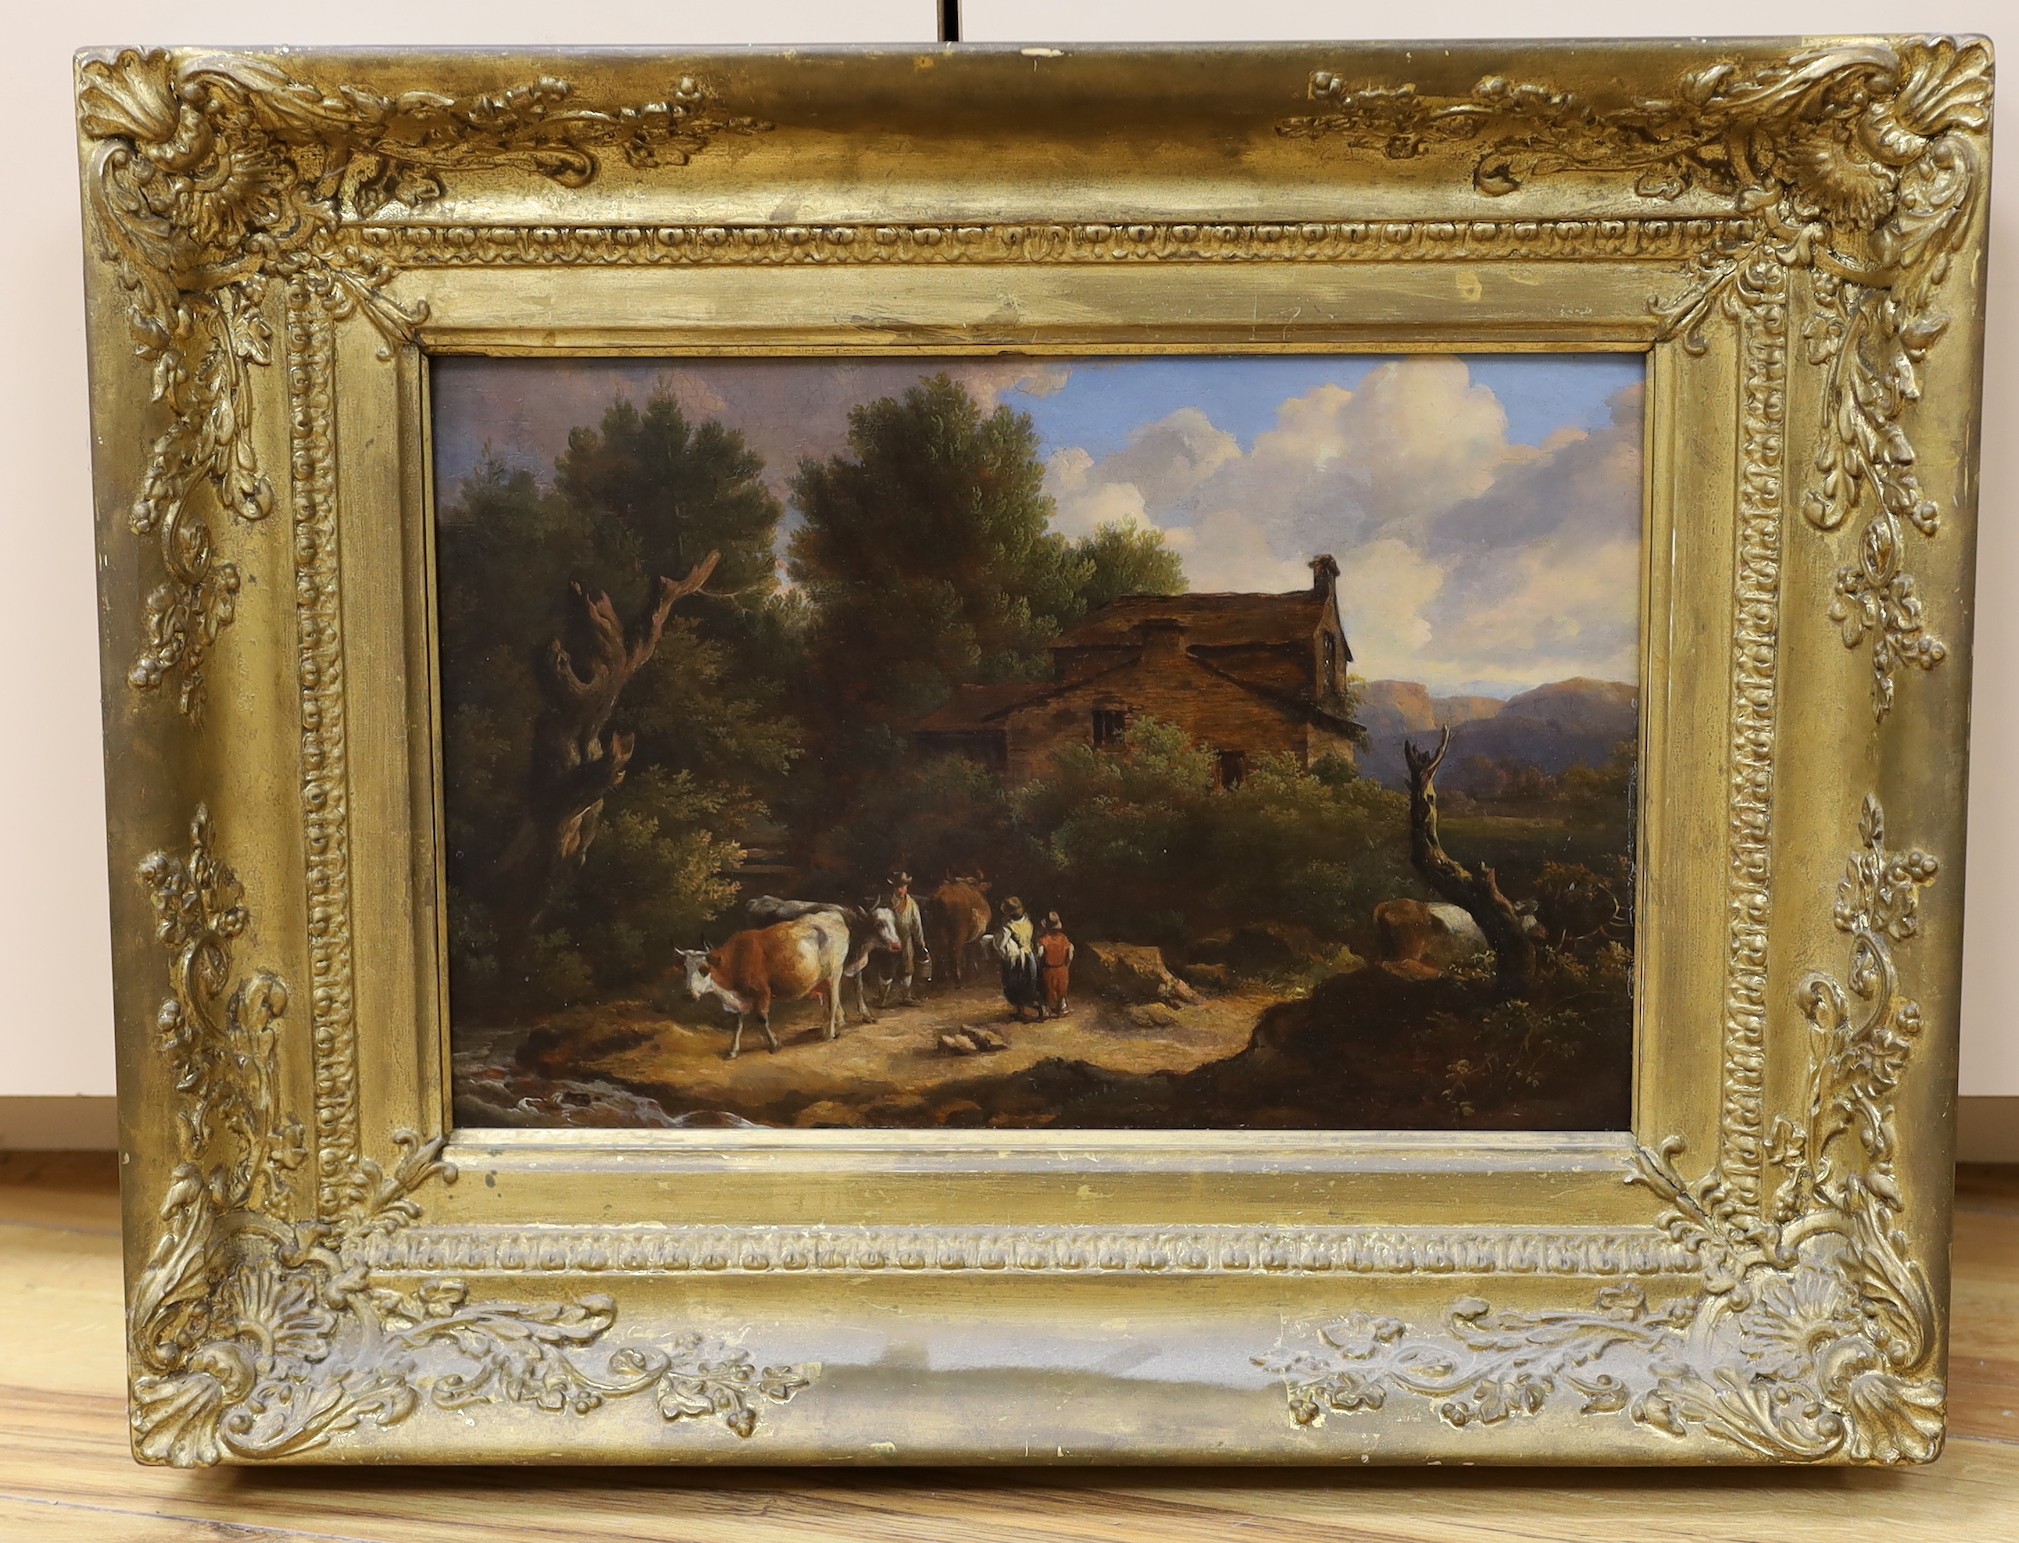 Early 19th century Continental School, oil on wooden panel, Cattle drover in a landscape, 24 x 37cm